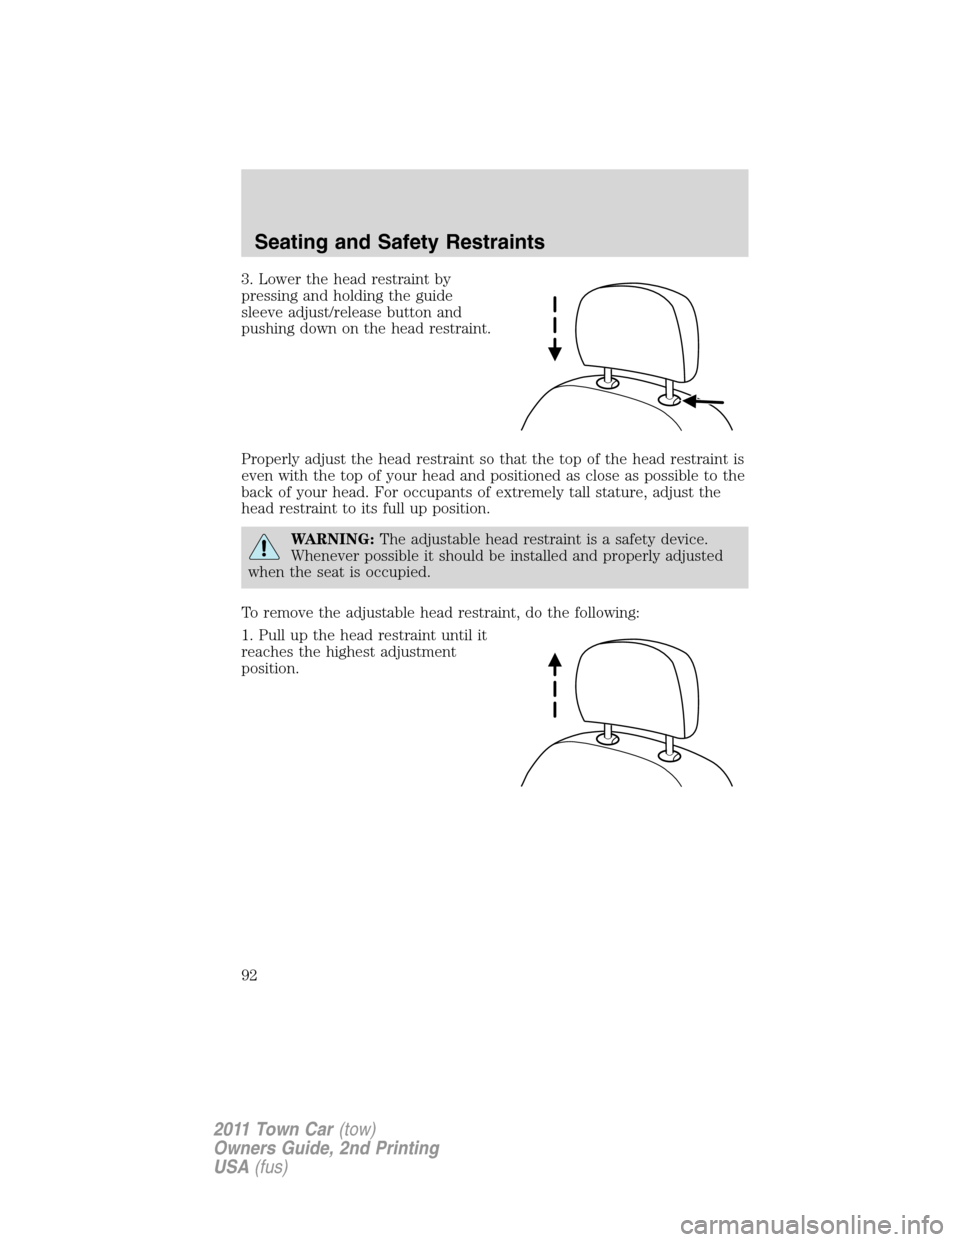 LINCOLN TOWN CAR 2011  Owners Manual 3. Lower the head restraint by
pressing and holding the guide
sleeve adjust/release button and
pushing down on the head restraint.
Properly adjust the head restraint so that the top of the head restra